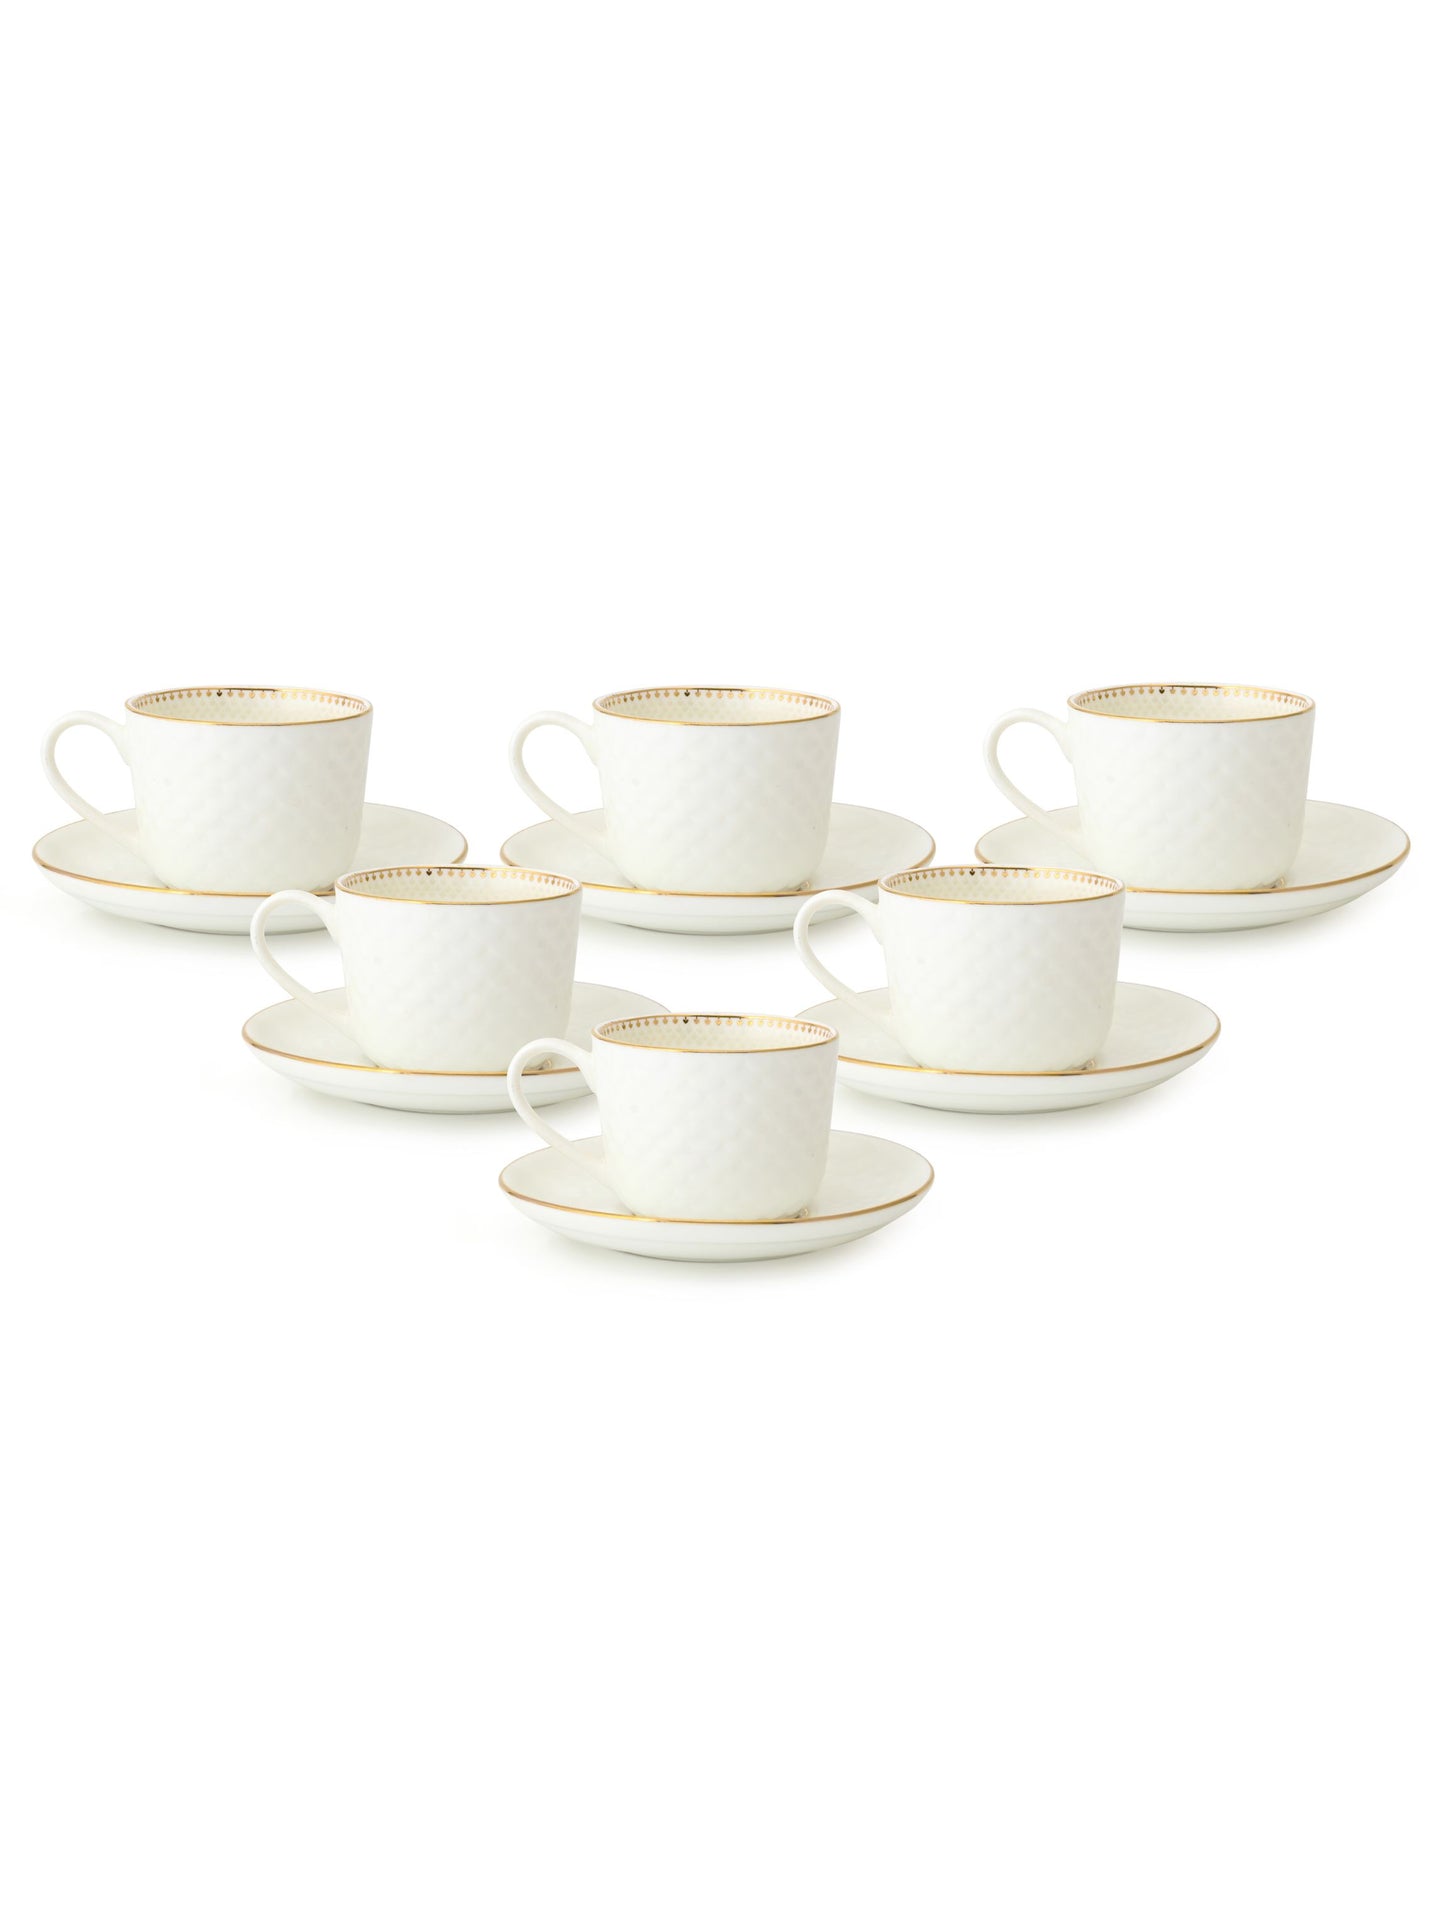 Ripple Impression Cup & Saucer, 130 ml, Set of 12 (6 Cups + 6 Saucers) (1409)